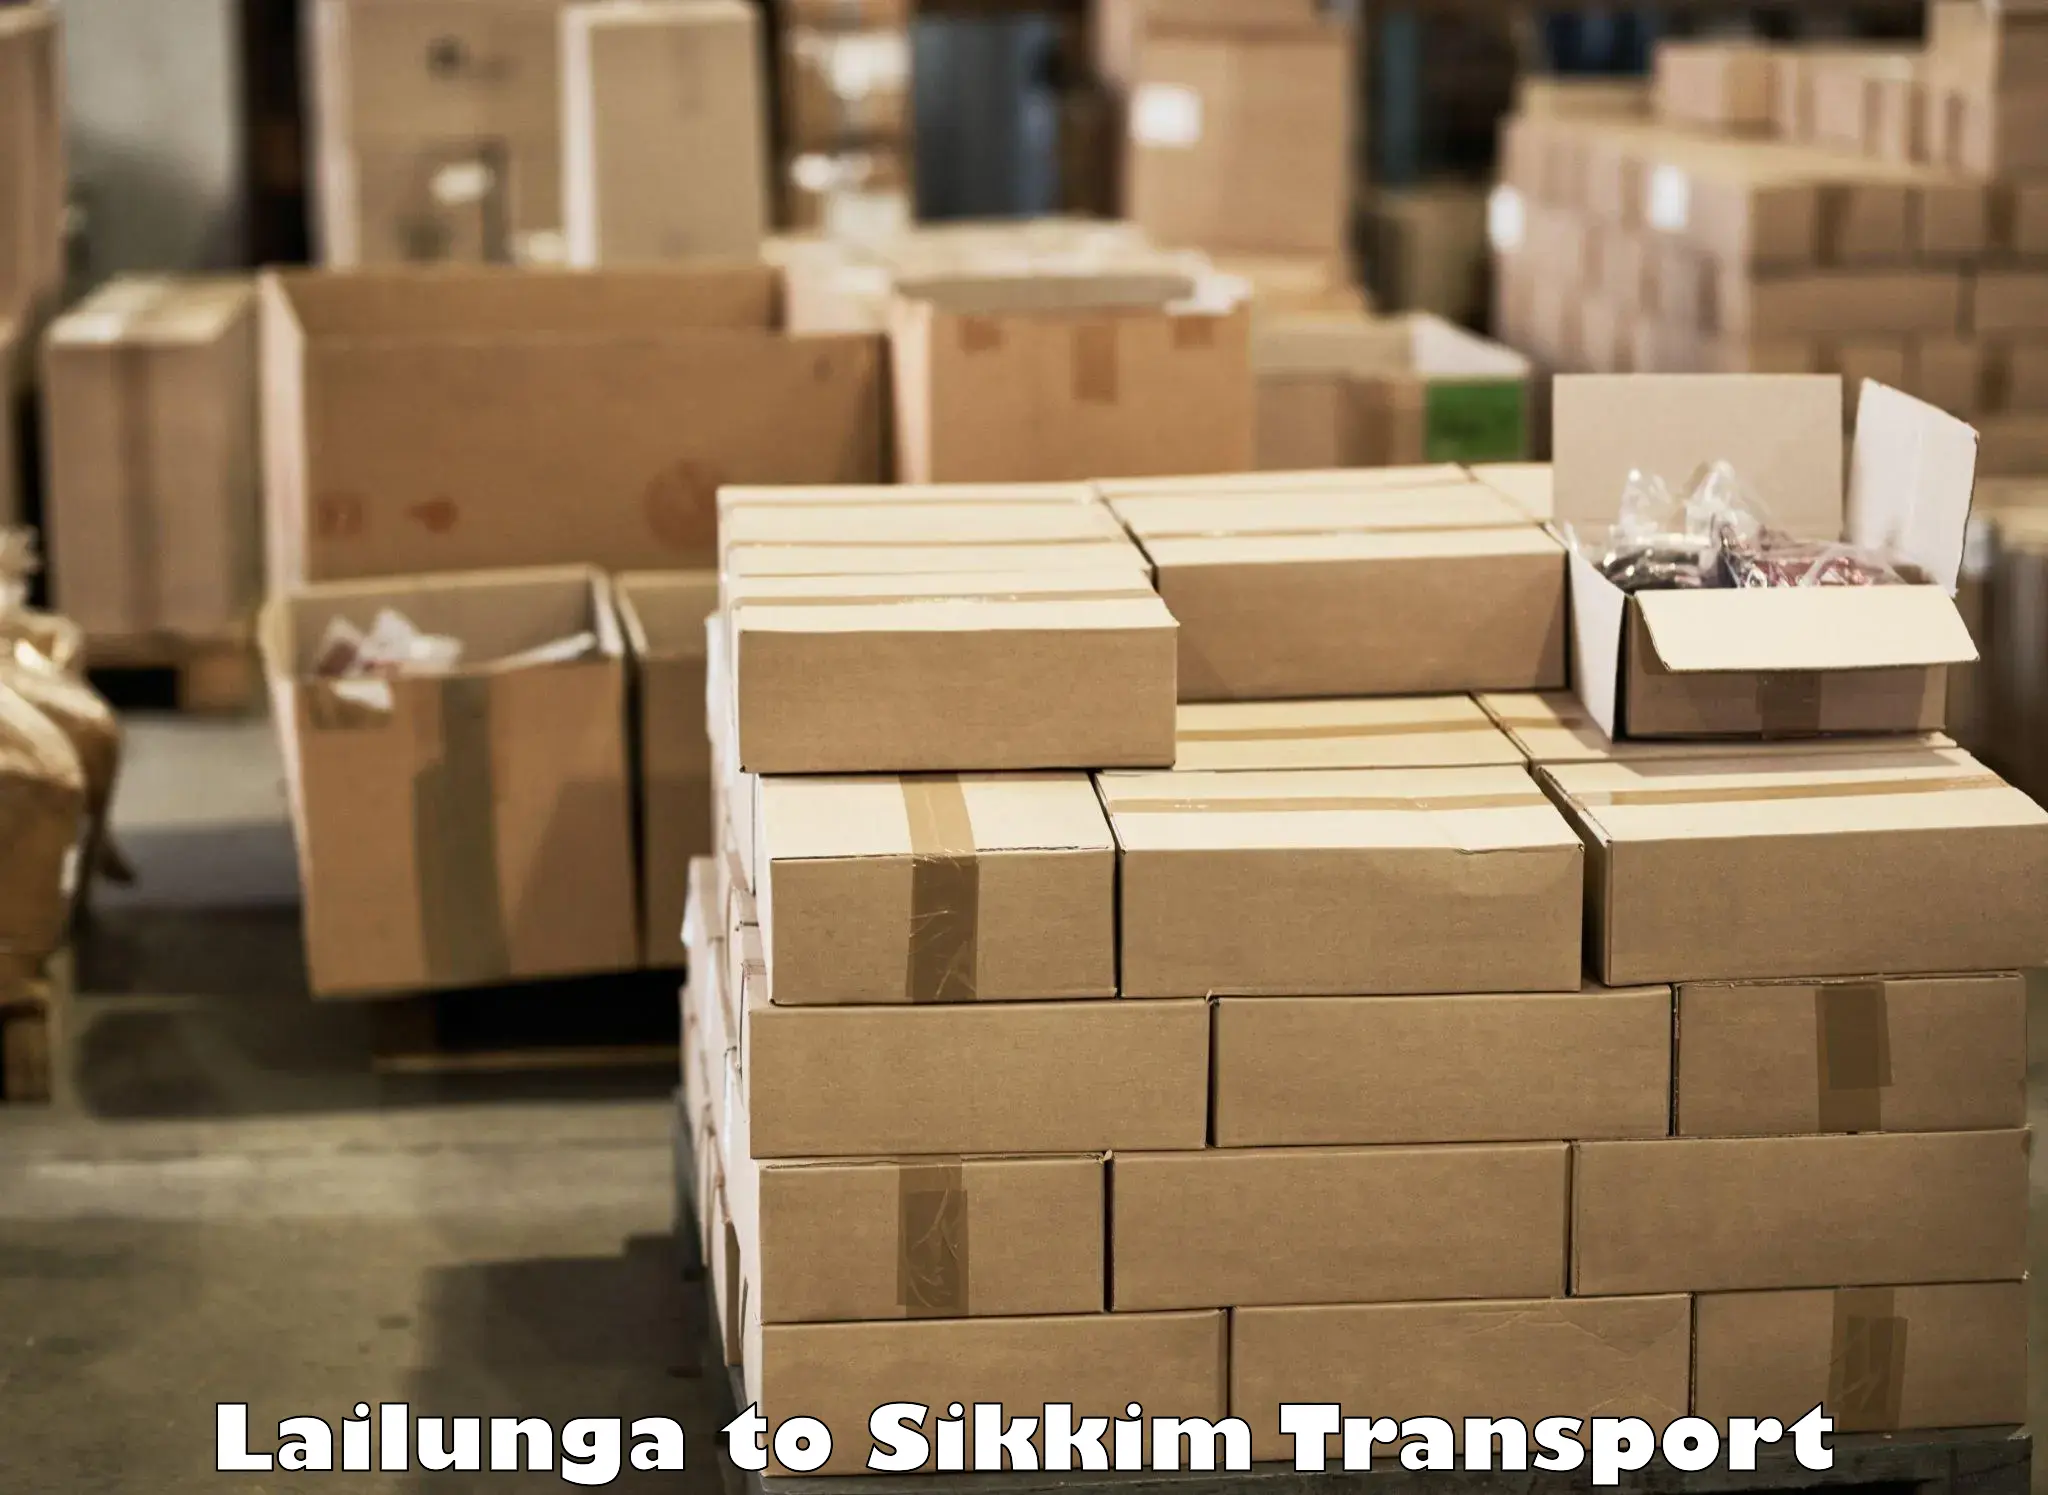 Vehicle transport services in Lailunga to Mangan